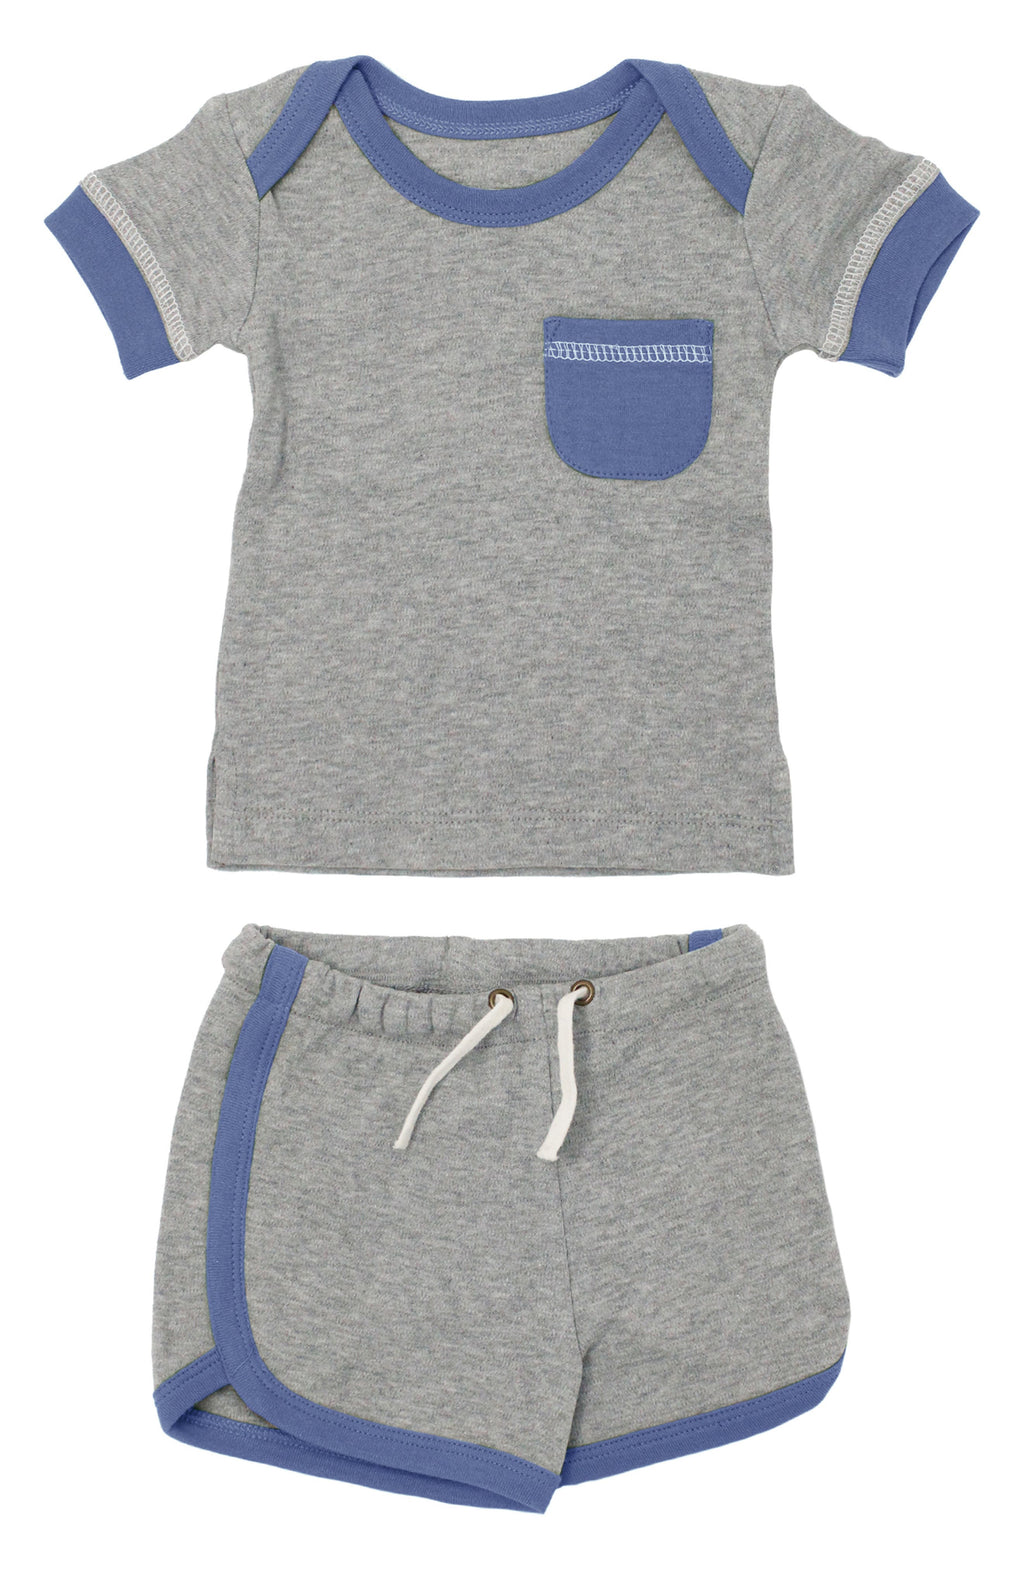 L'ovedbaby Organic Cotton T-Shirt & Shorts Set, Main, color, Slate Heather